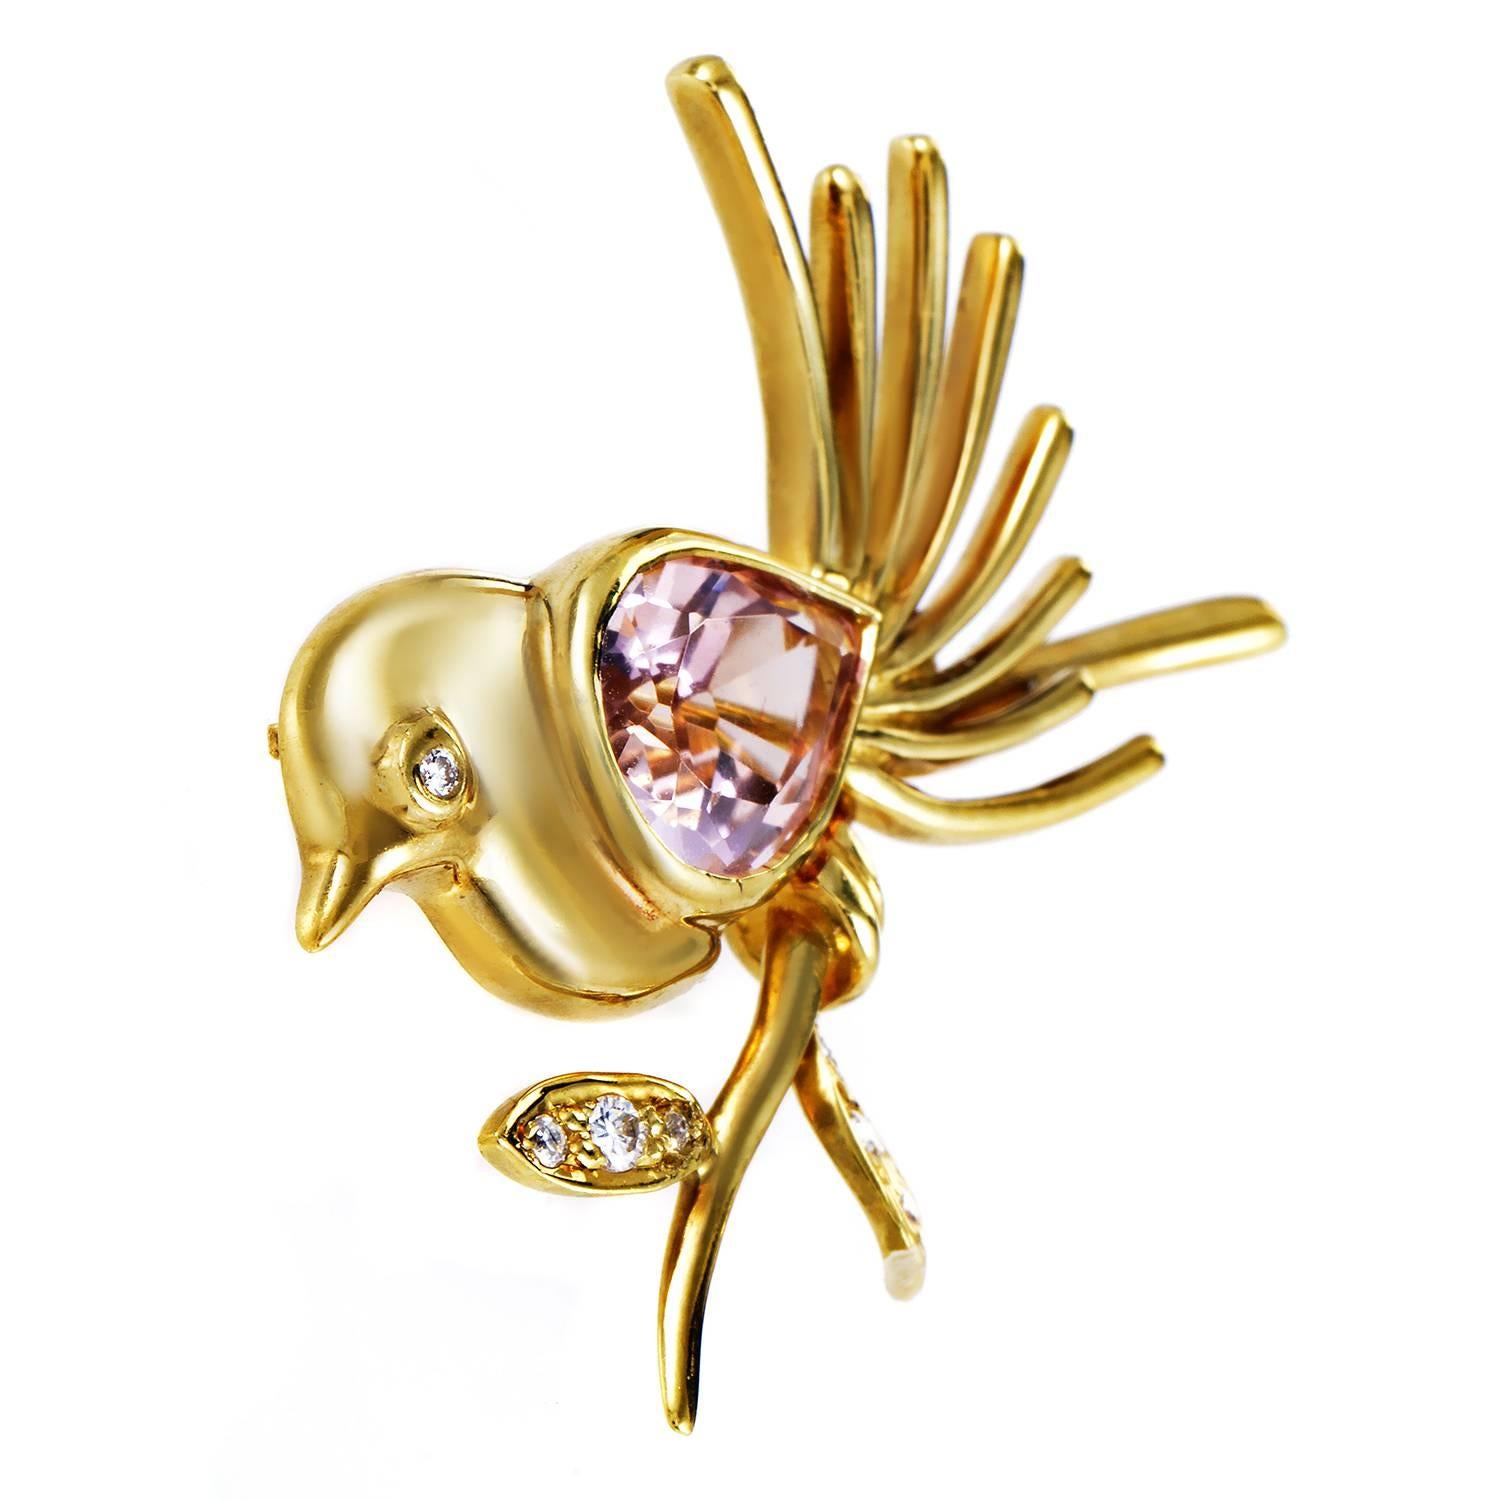 Employing an adorable motif from the ever-enchanting world of nature, Tiffany & Co. present this gorgeous brooch in radiant 18K yellow gold molded into an appealing form of a bird and embellished with glittering diamonds as well as a marvelous